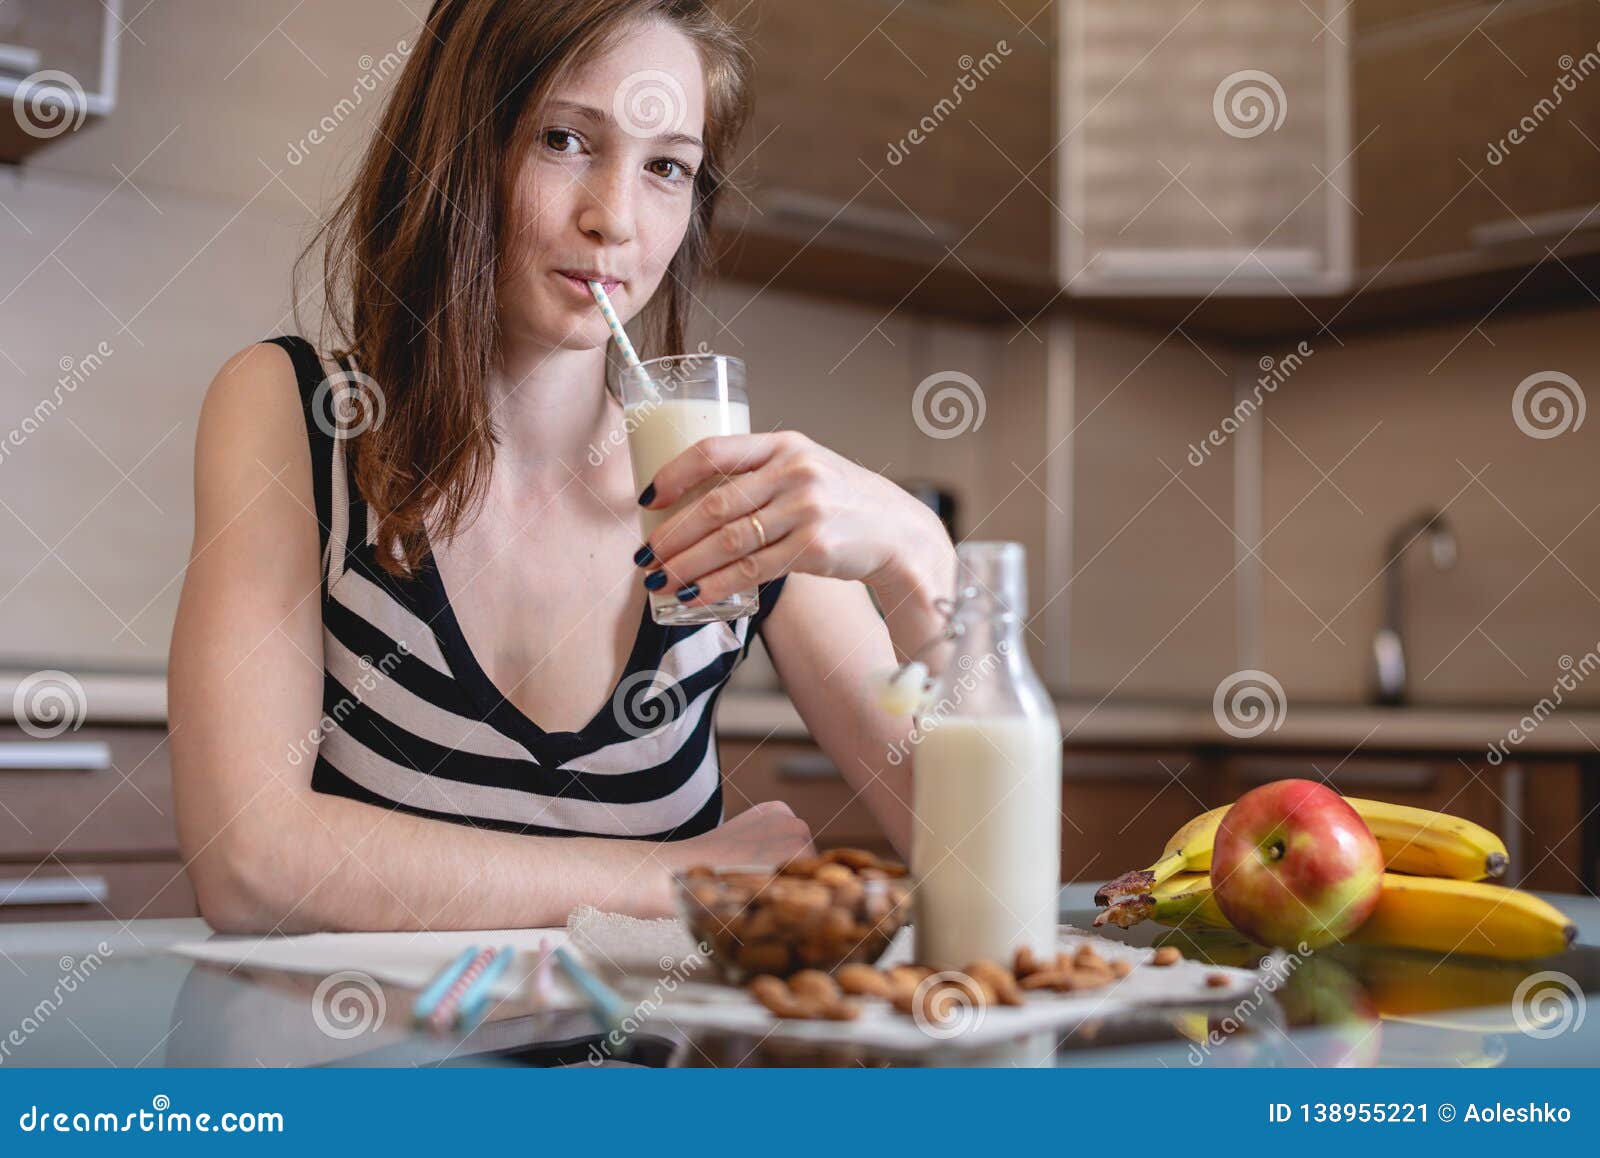 Woman Drinking Organic Almond Milk Holding A Glass In Her Hand I